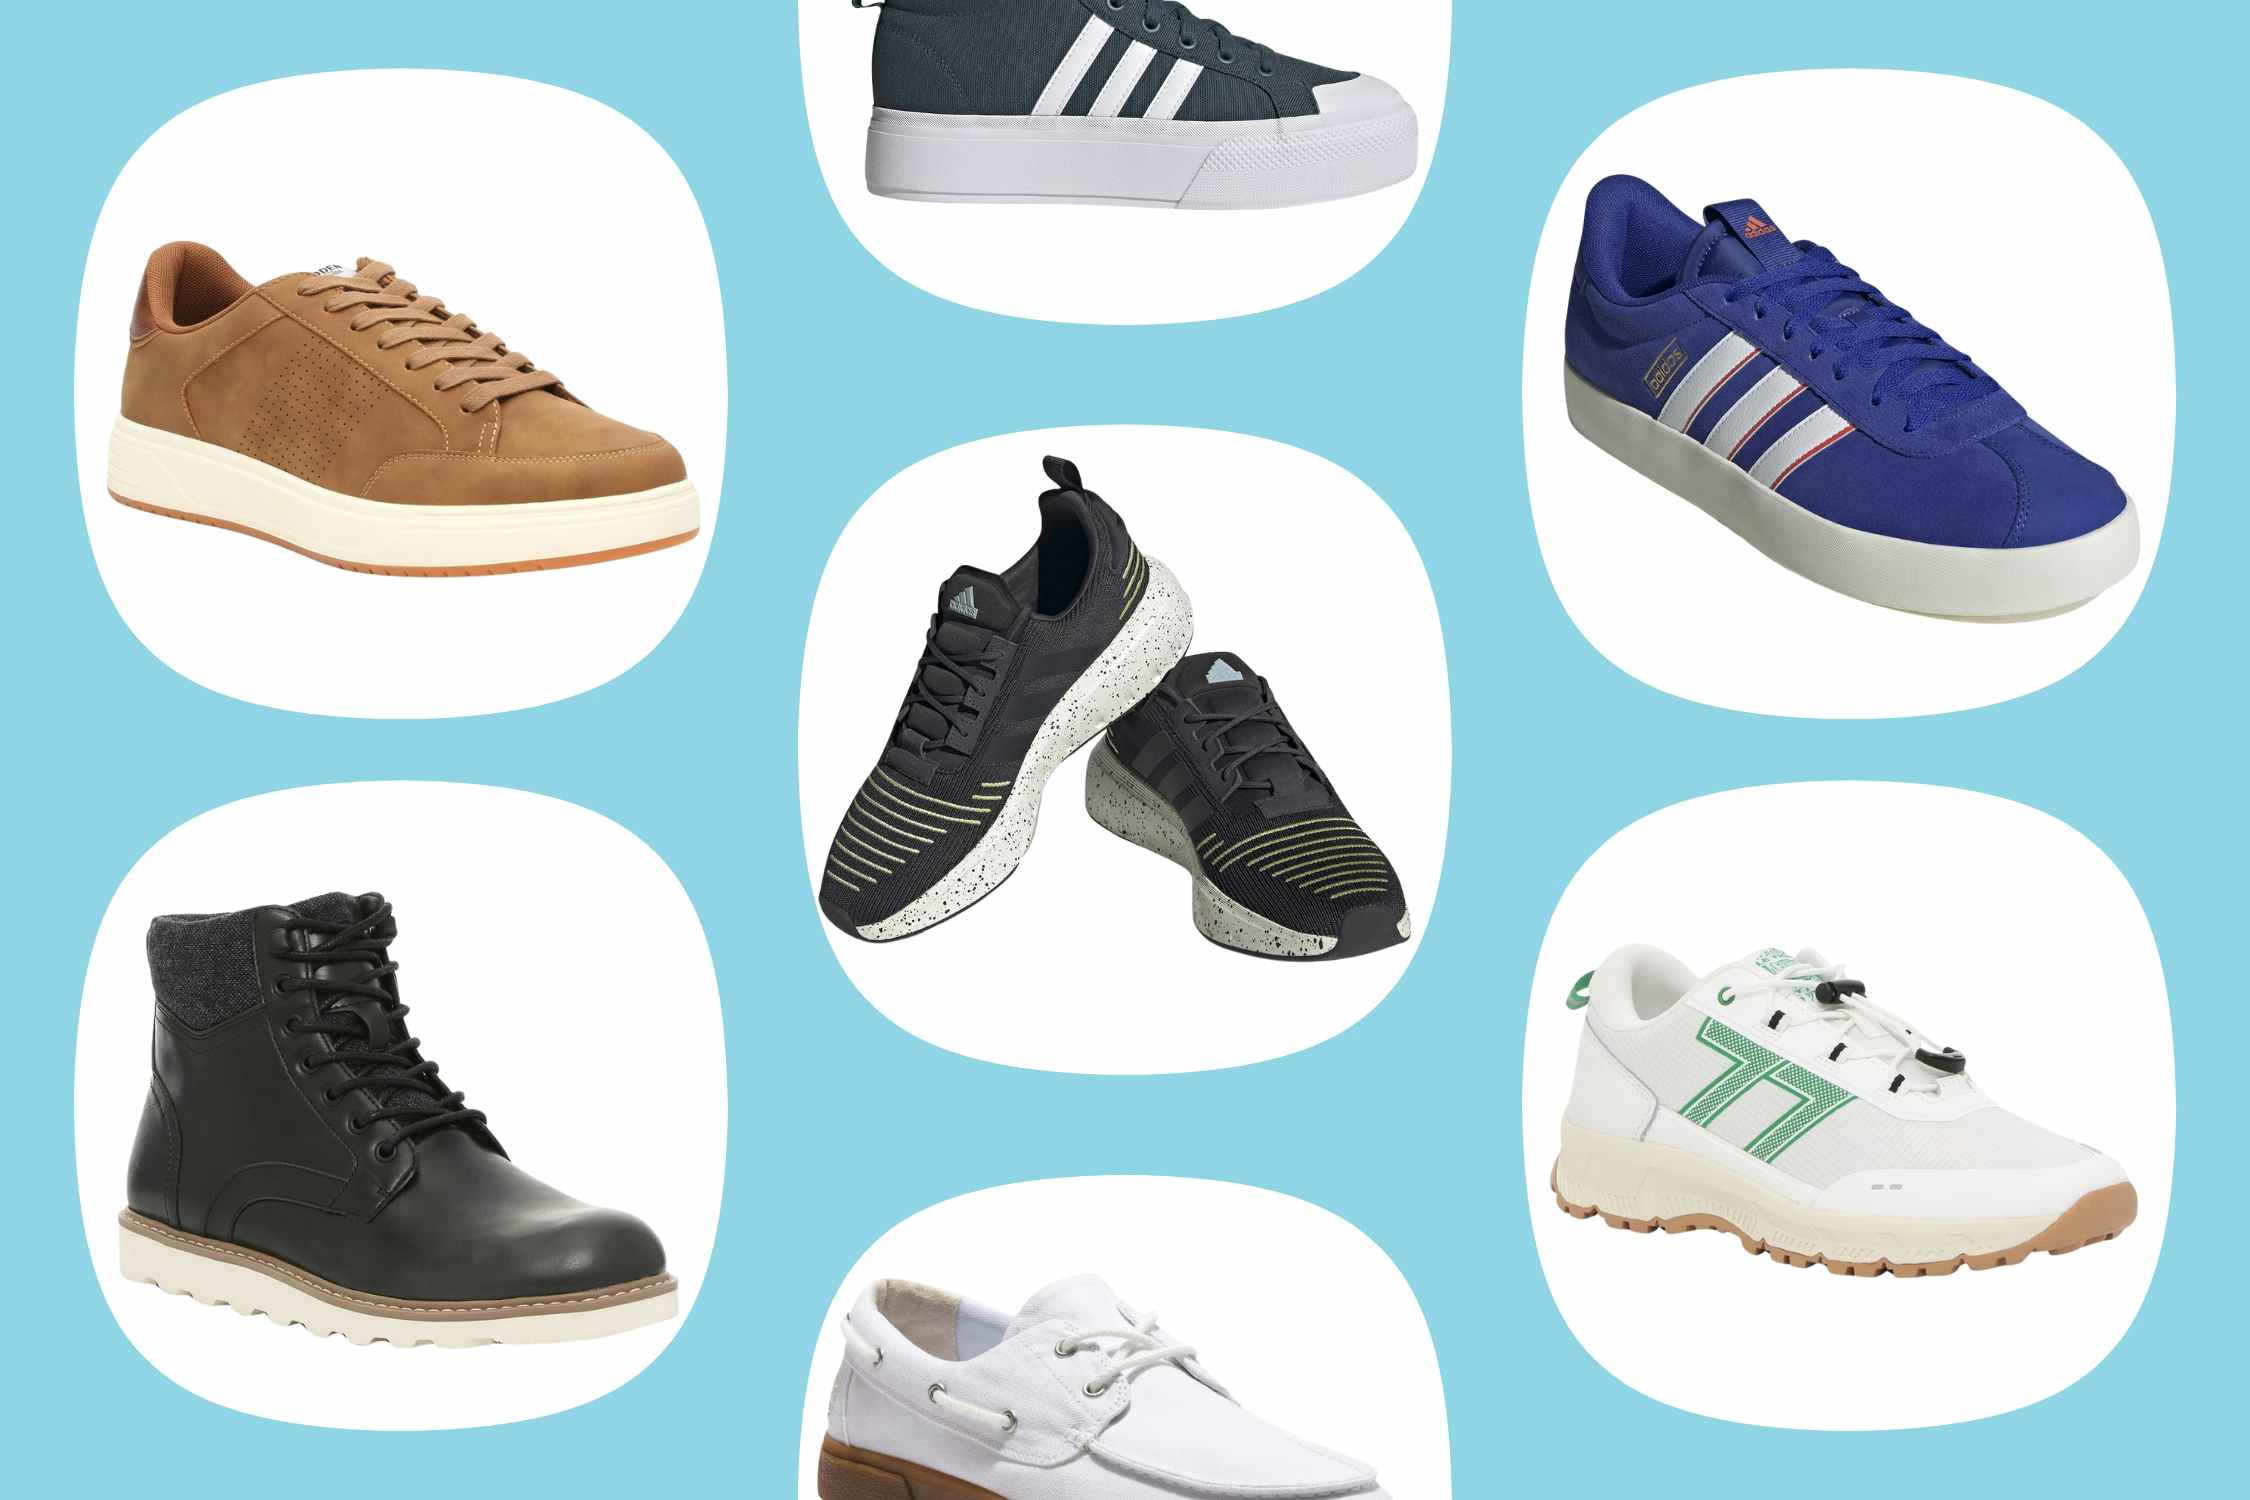 DSW Semi-Annual Sale: $24 Boots, $40 Sneakers, $45 Adidas, and More